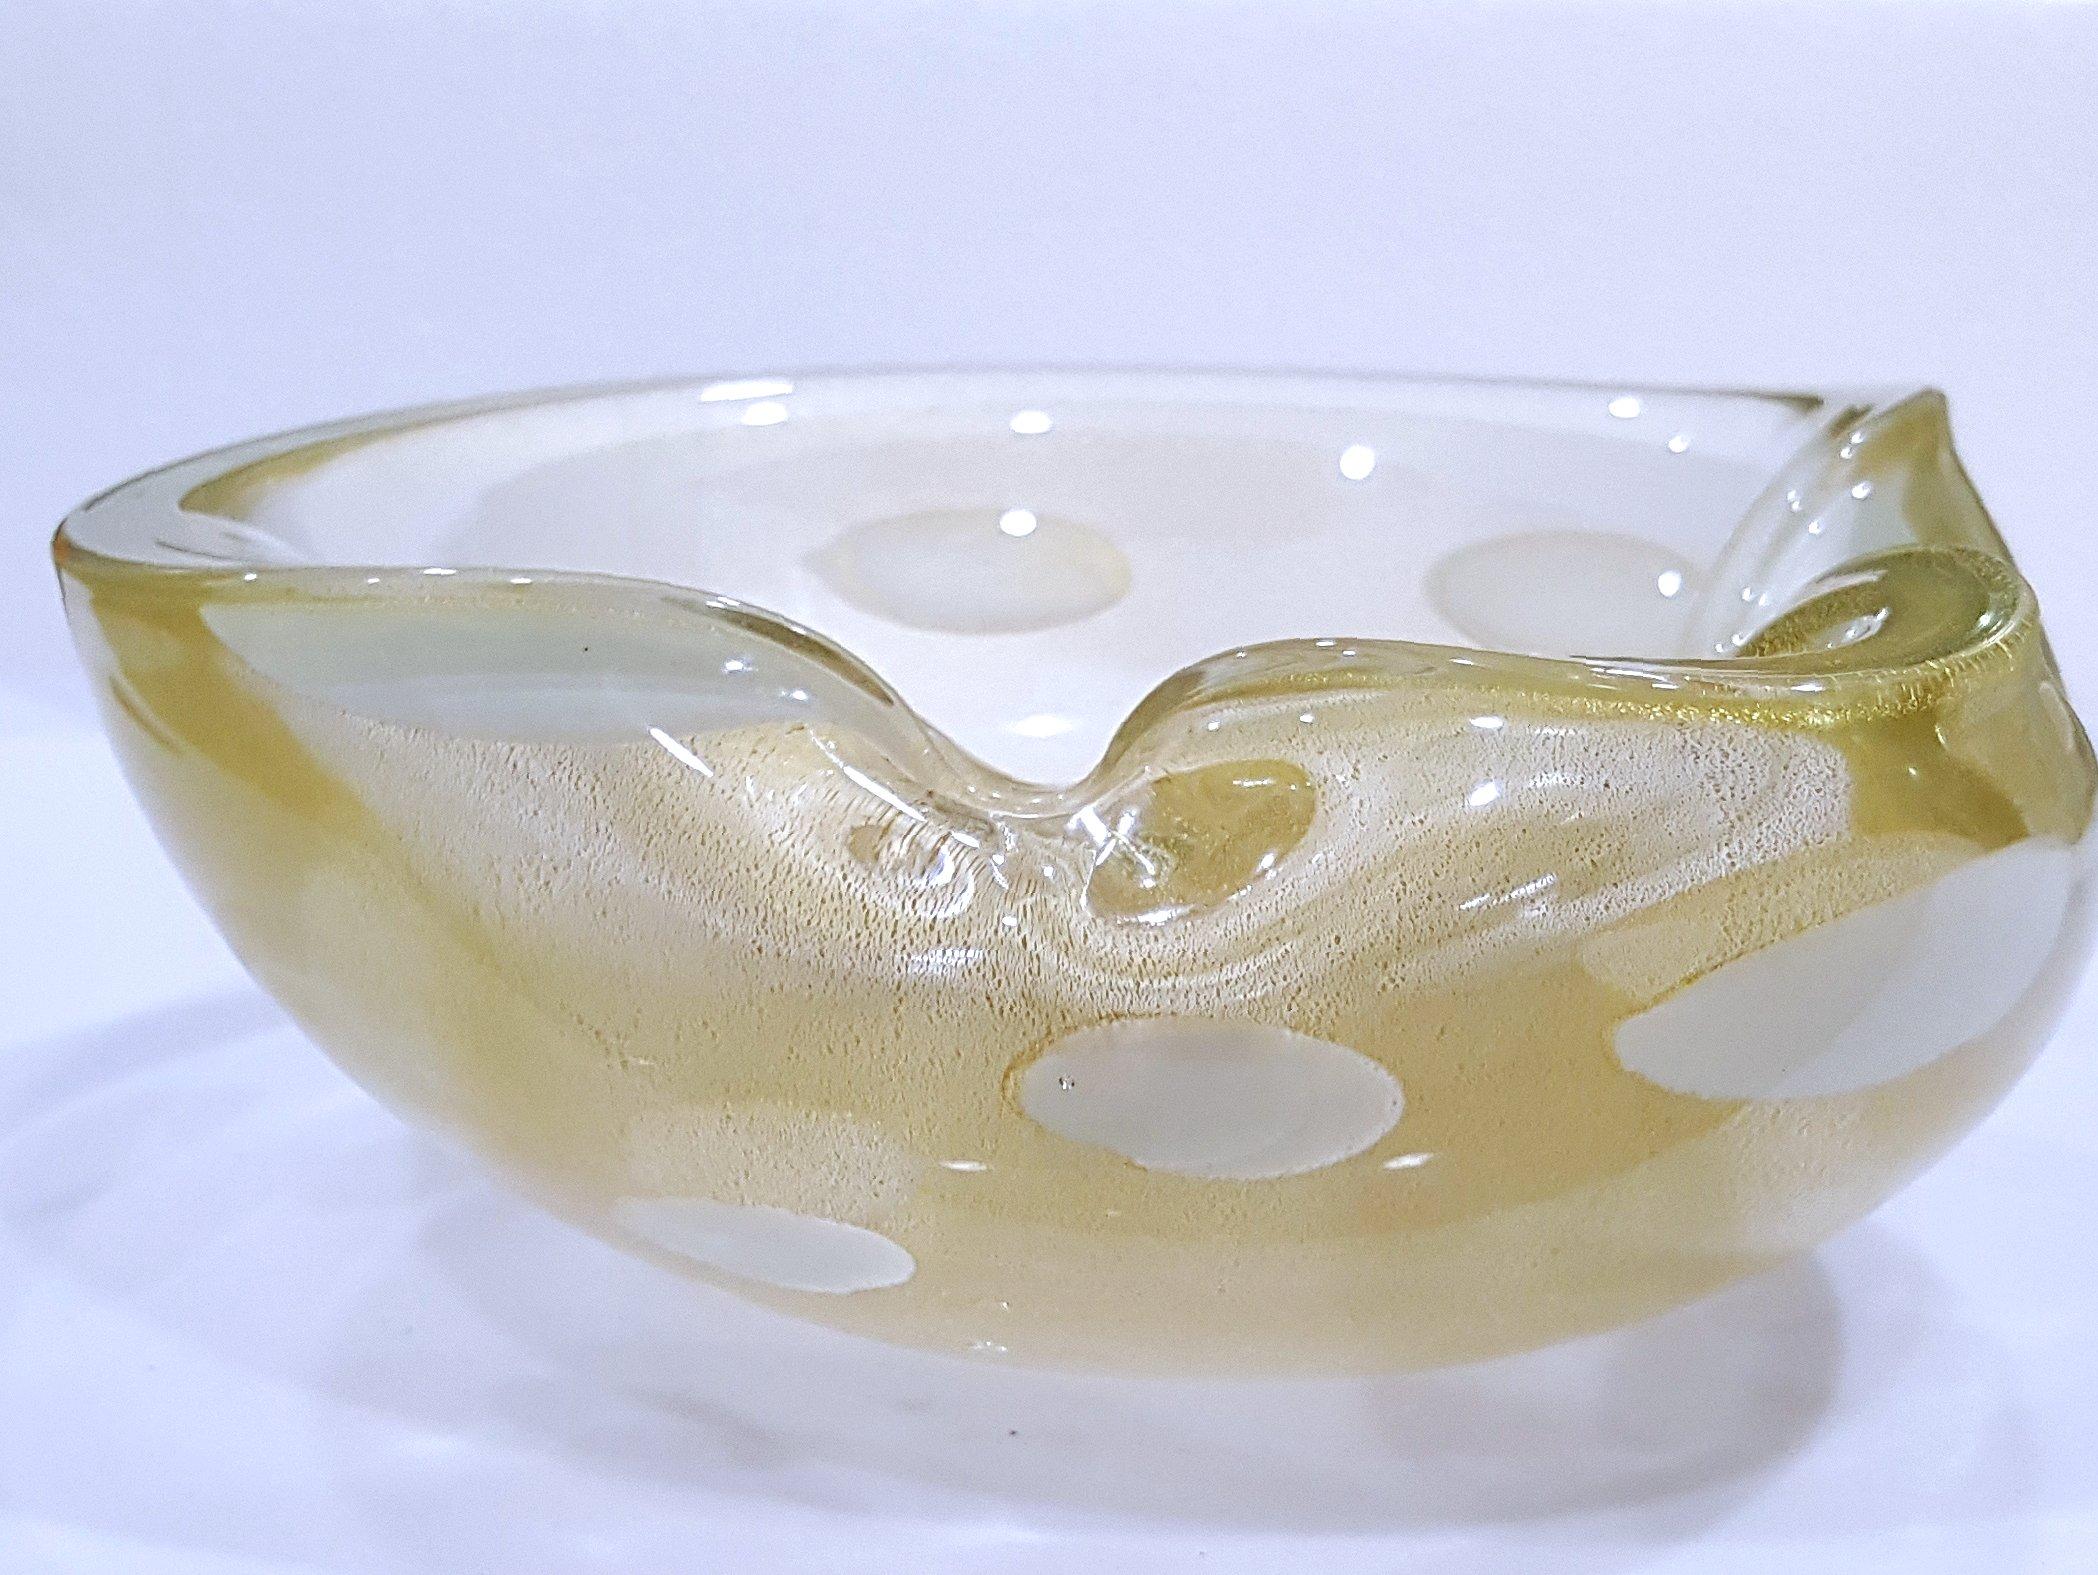 Alfredo Barbini Murano Glass Bowl, Gold Polveri w/White A Pentoni (spots)

This has been documented to Alfredo Barbini by others.
No chips or cracks. The lines shown in the photos are the spaces between the gold polveri. They are NOT cracks.
A few